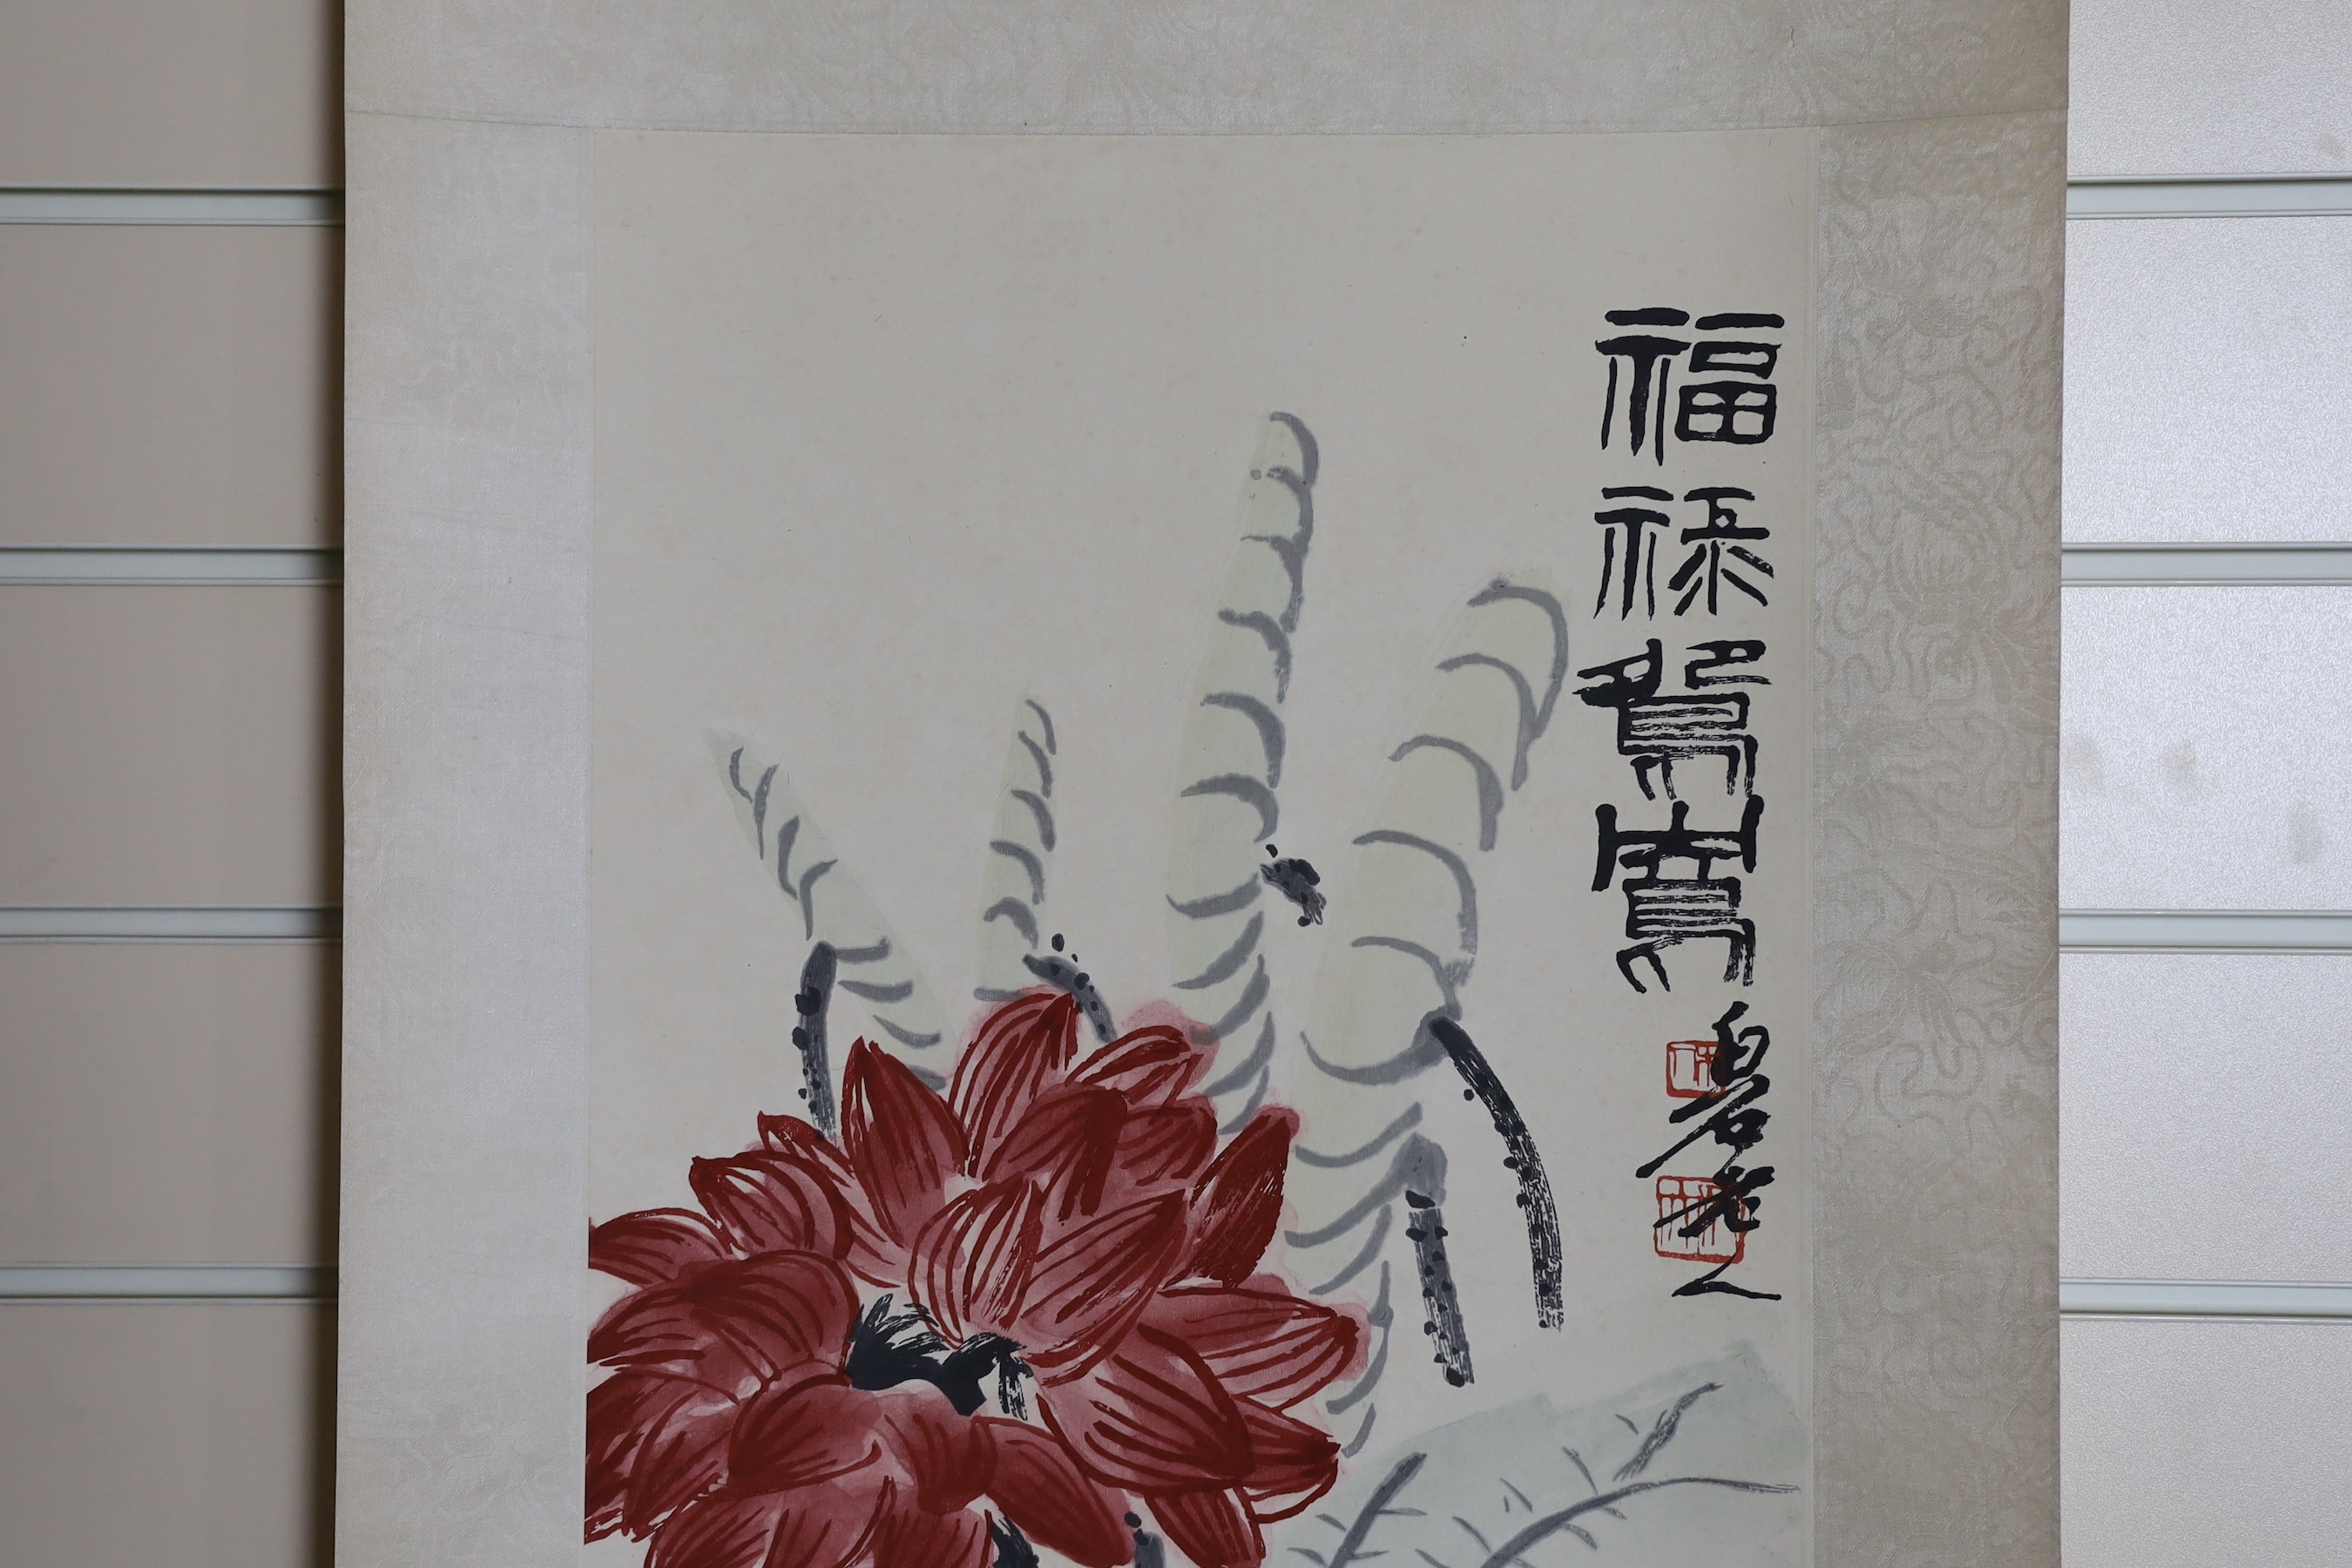 After Qi Baishi (1863-1957), Mandarin ducks, printed scroll, published by Tianjin Arts & Crafts Export Company, 1959, image 103cm x 33cm